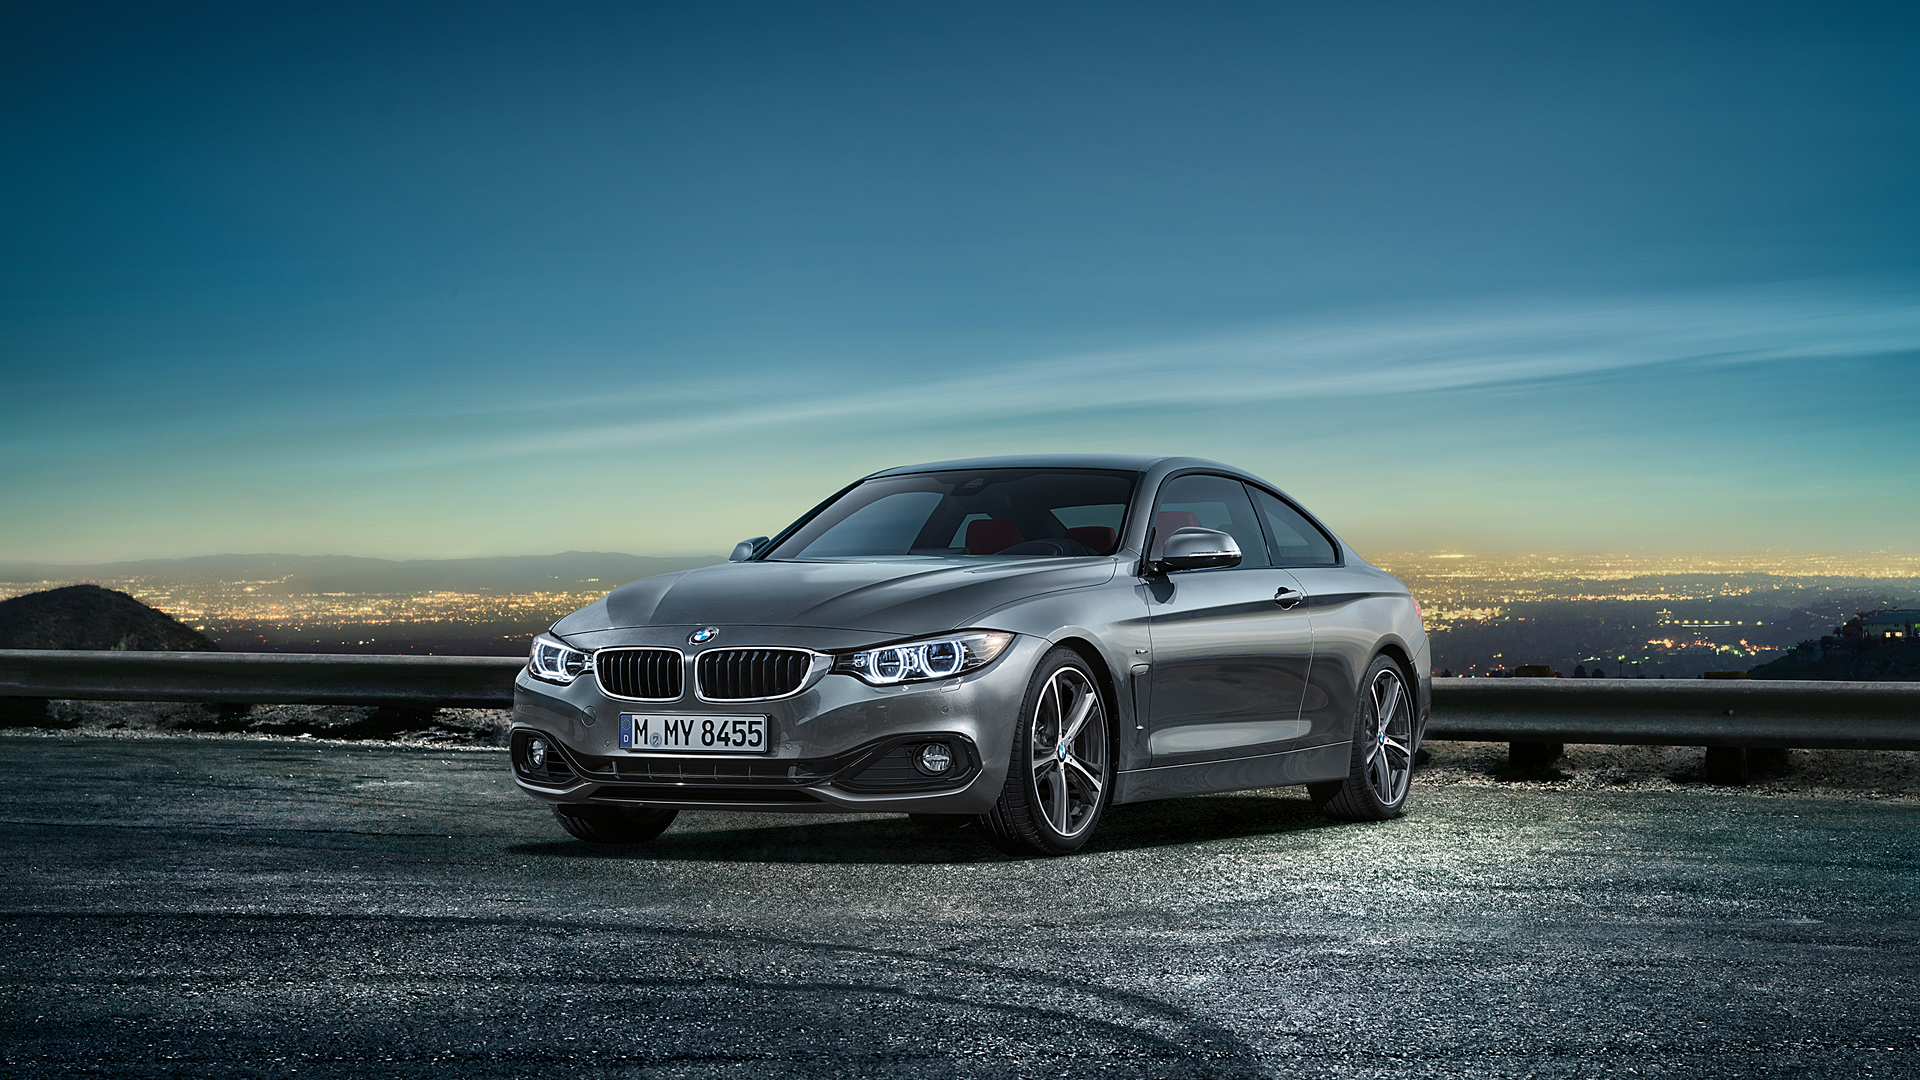  2014 BMW 4-Series Coupe Wallpaper.